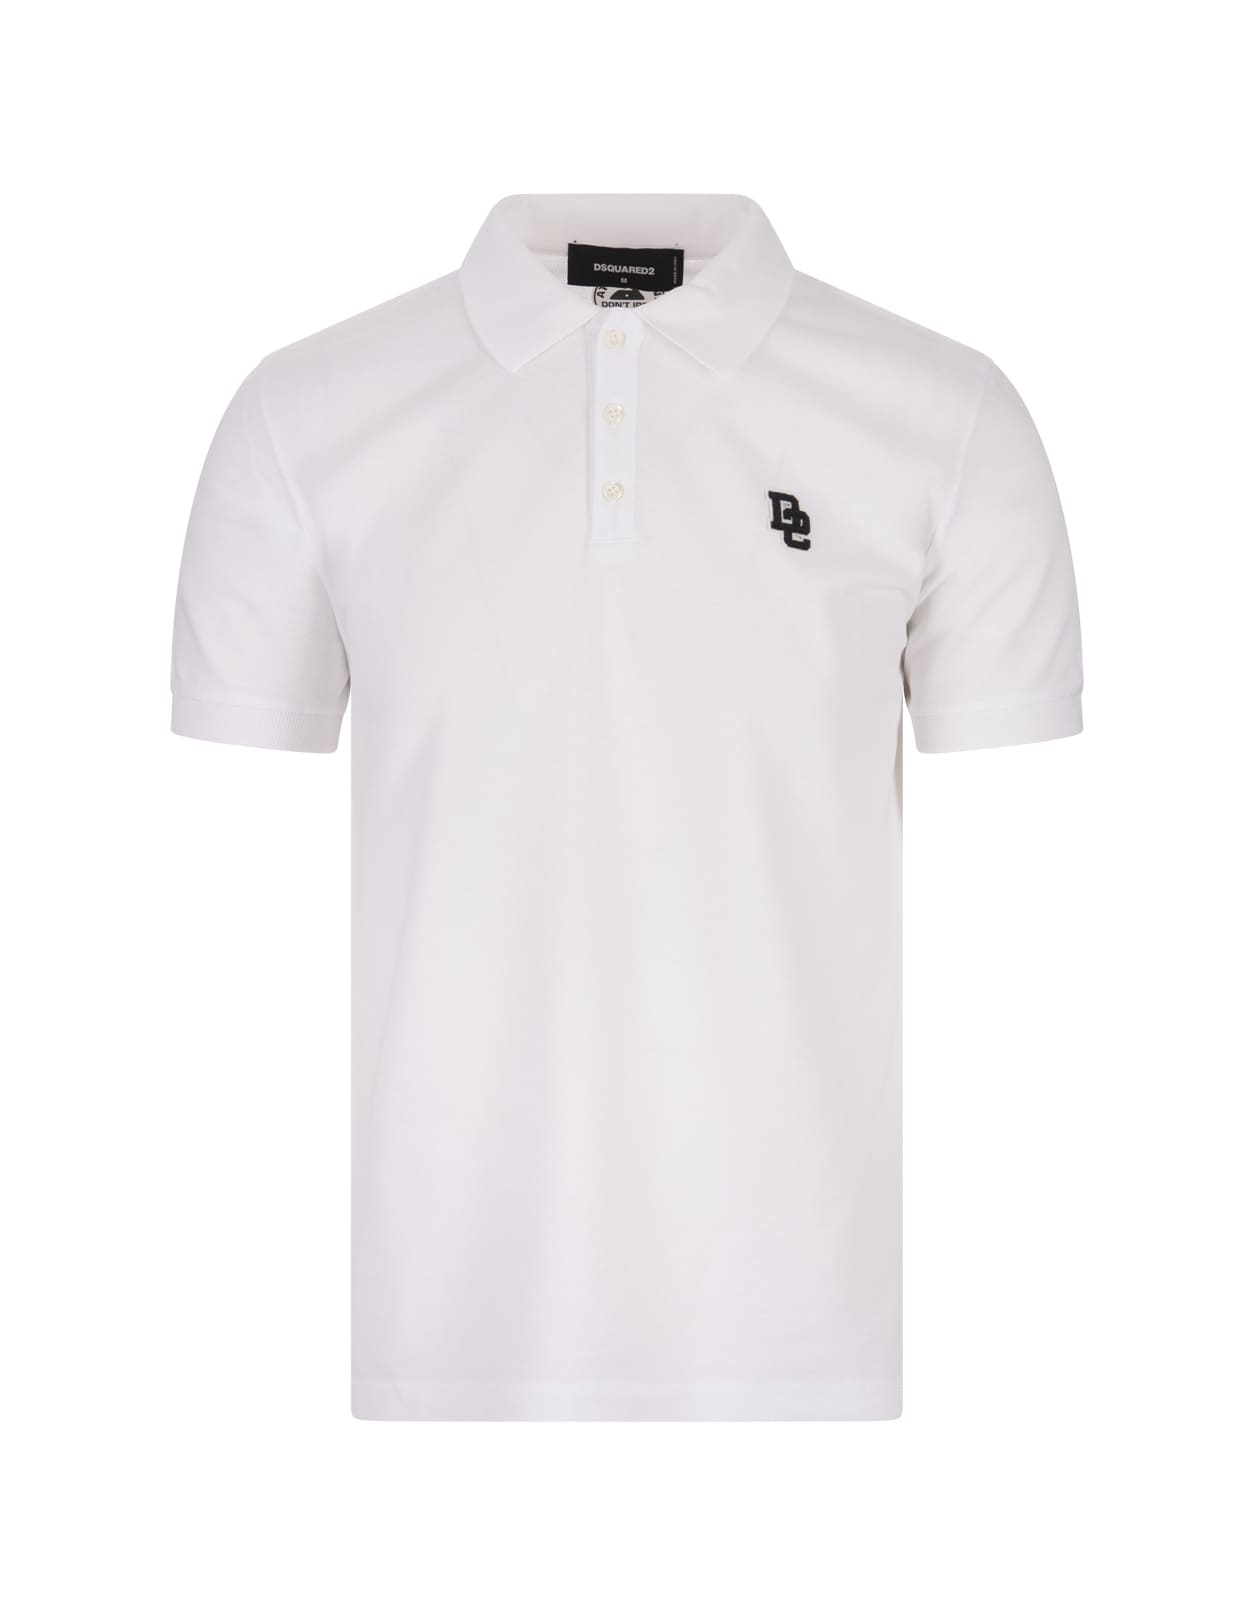 Dsquared2 White Tennis Fit Polo Shirt